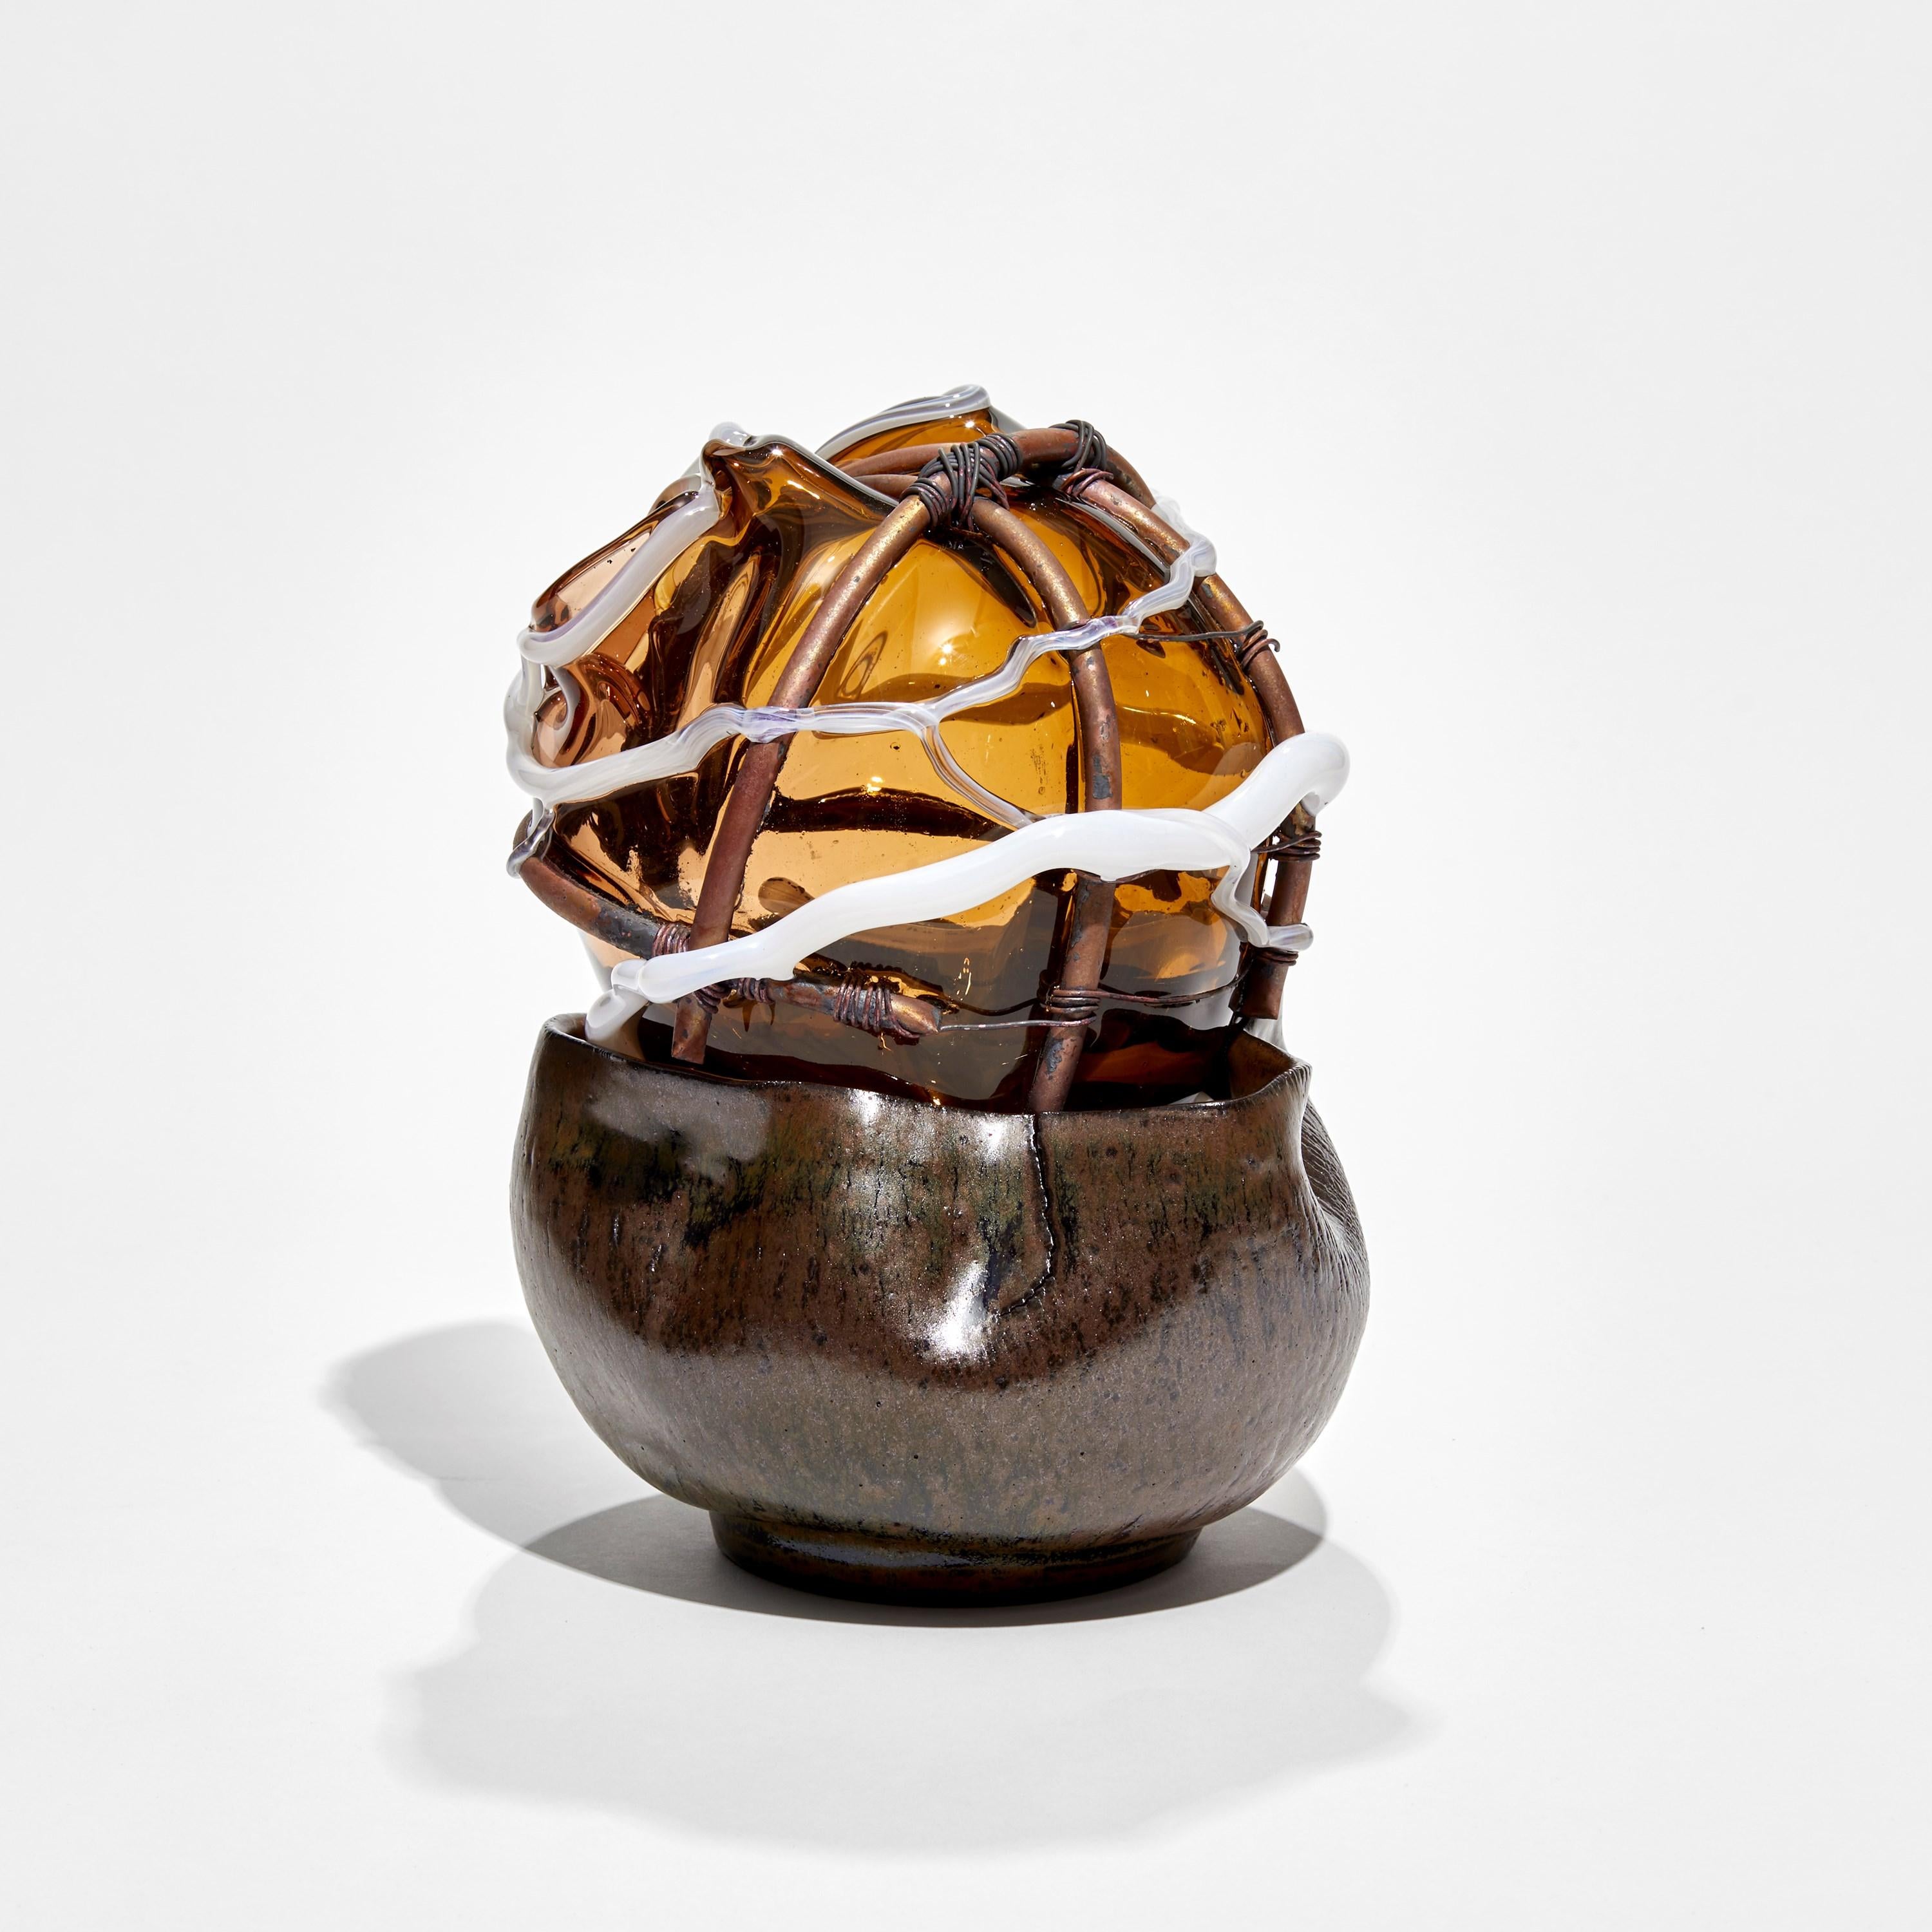 'Strange Fruit - The Congregation VIII' is a unique sculpture by the British artist, Chris Day, created from handblown & sculpted glass with terracotta, micro bore copper pipe and copper wire.

This piece was created as a part of the artist's